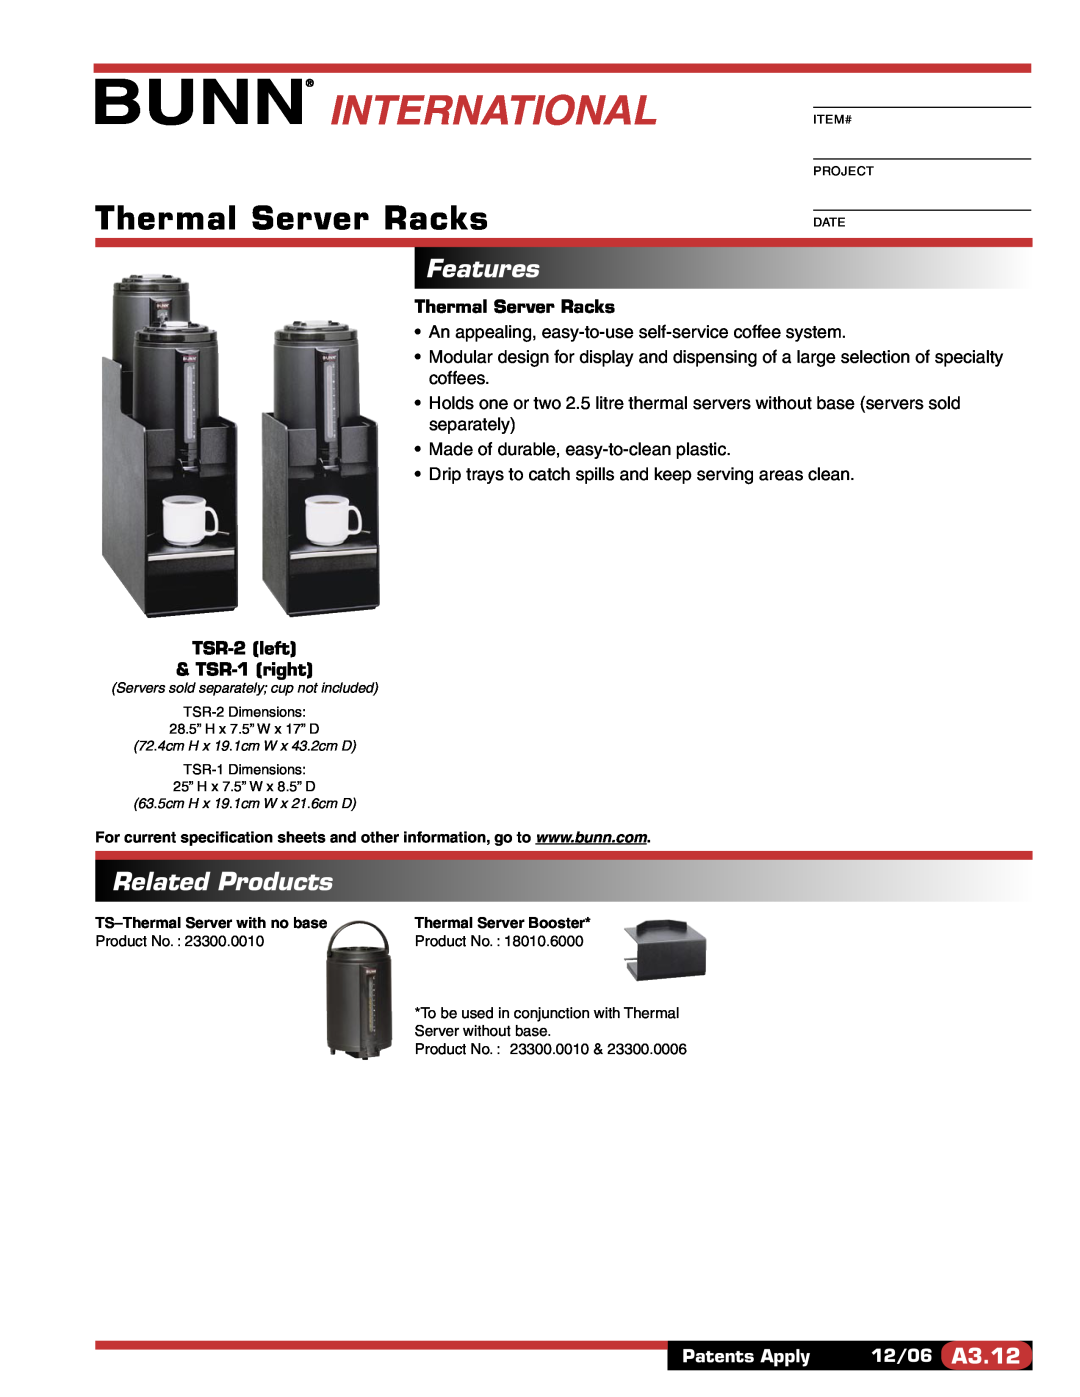 Bunn specifications Thermal Server Racks, TSR-2left & TSR-1right, International Item#, Features, Related Products 